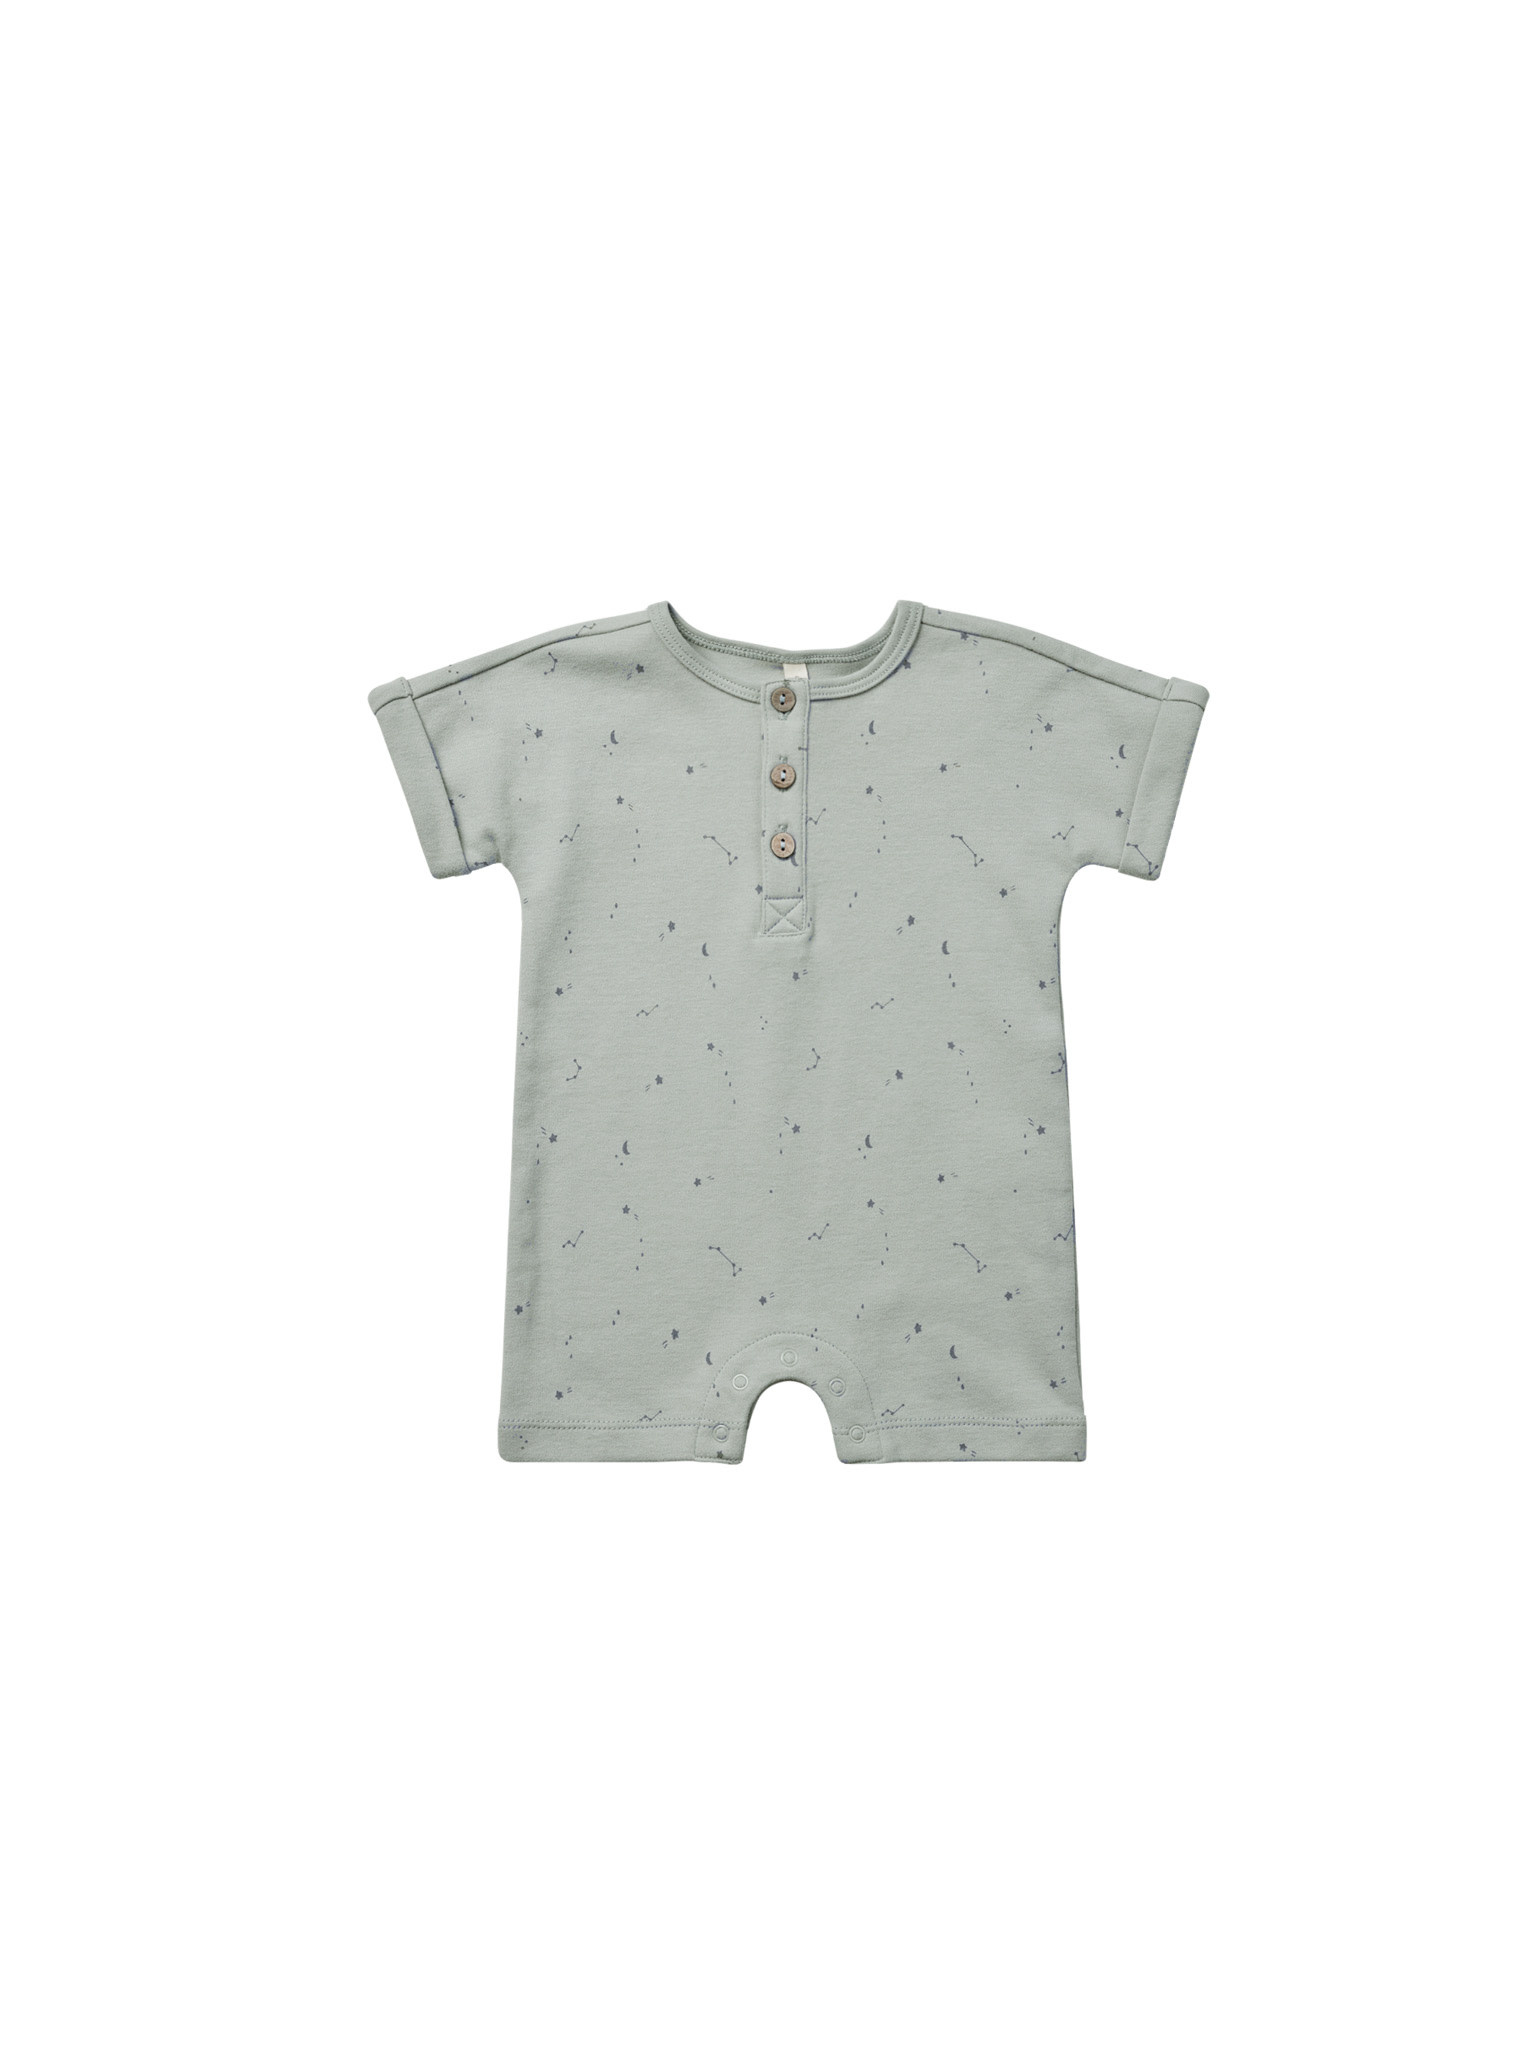 Quincy Mae Quincy Mae Constellations One Piece